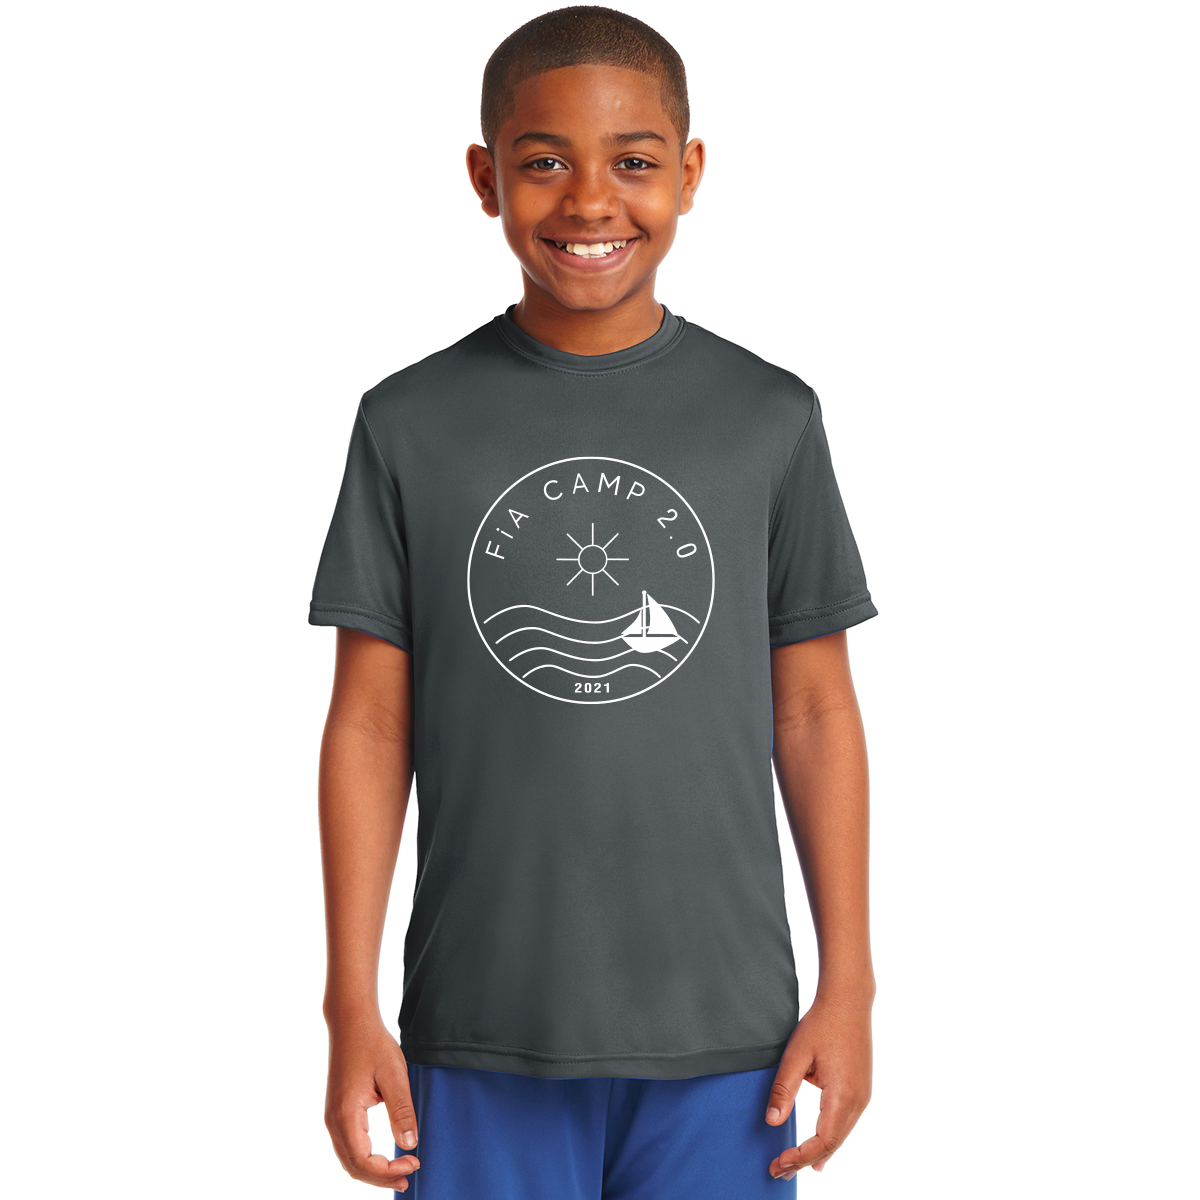 CLEARANCE ITEM - FiA Camp 2.0 - Sport-Tek Youth PosiCharge Competitor Tee (Iron Grey)